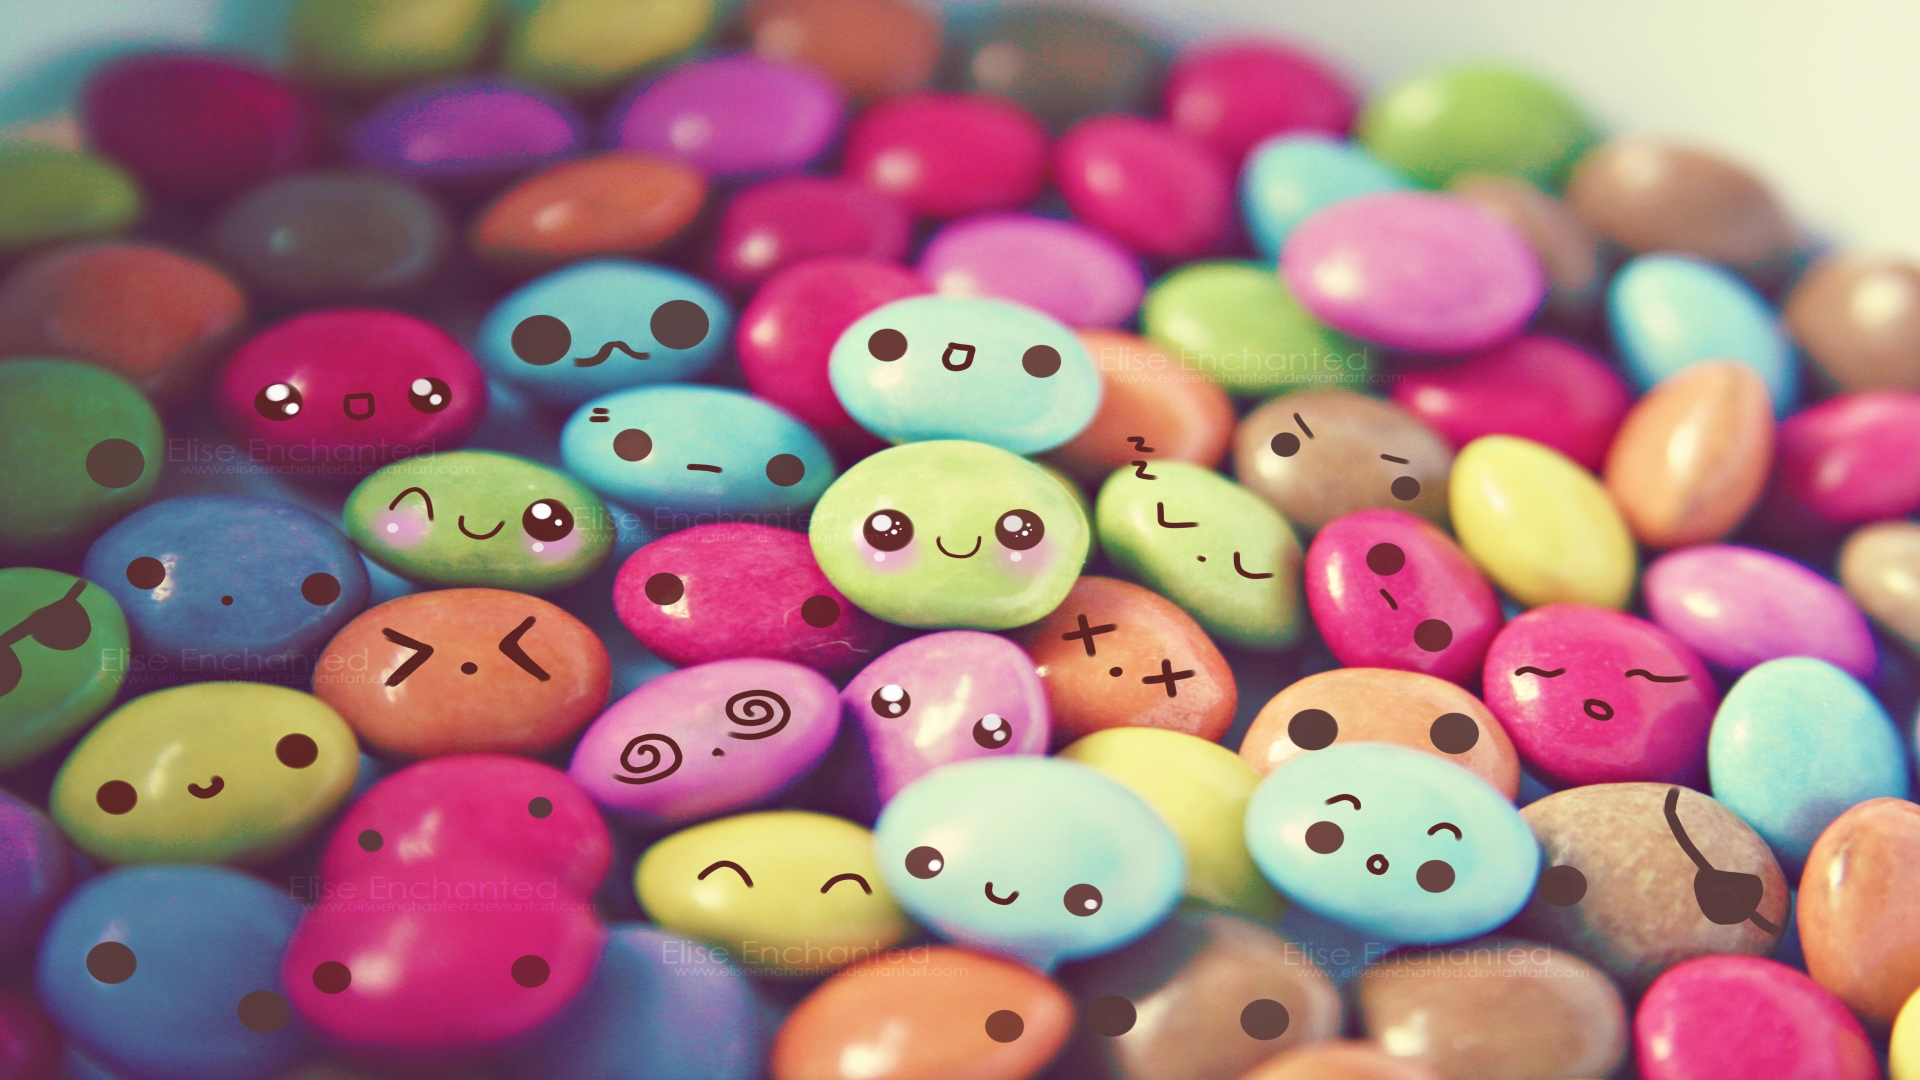 Related For Cute Colorful Wallpaper